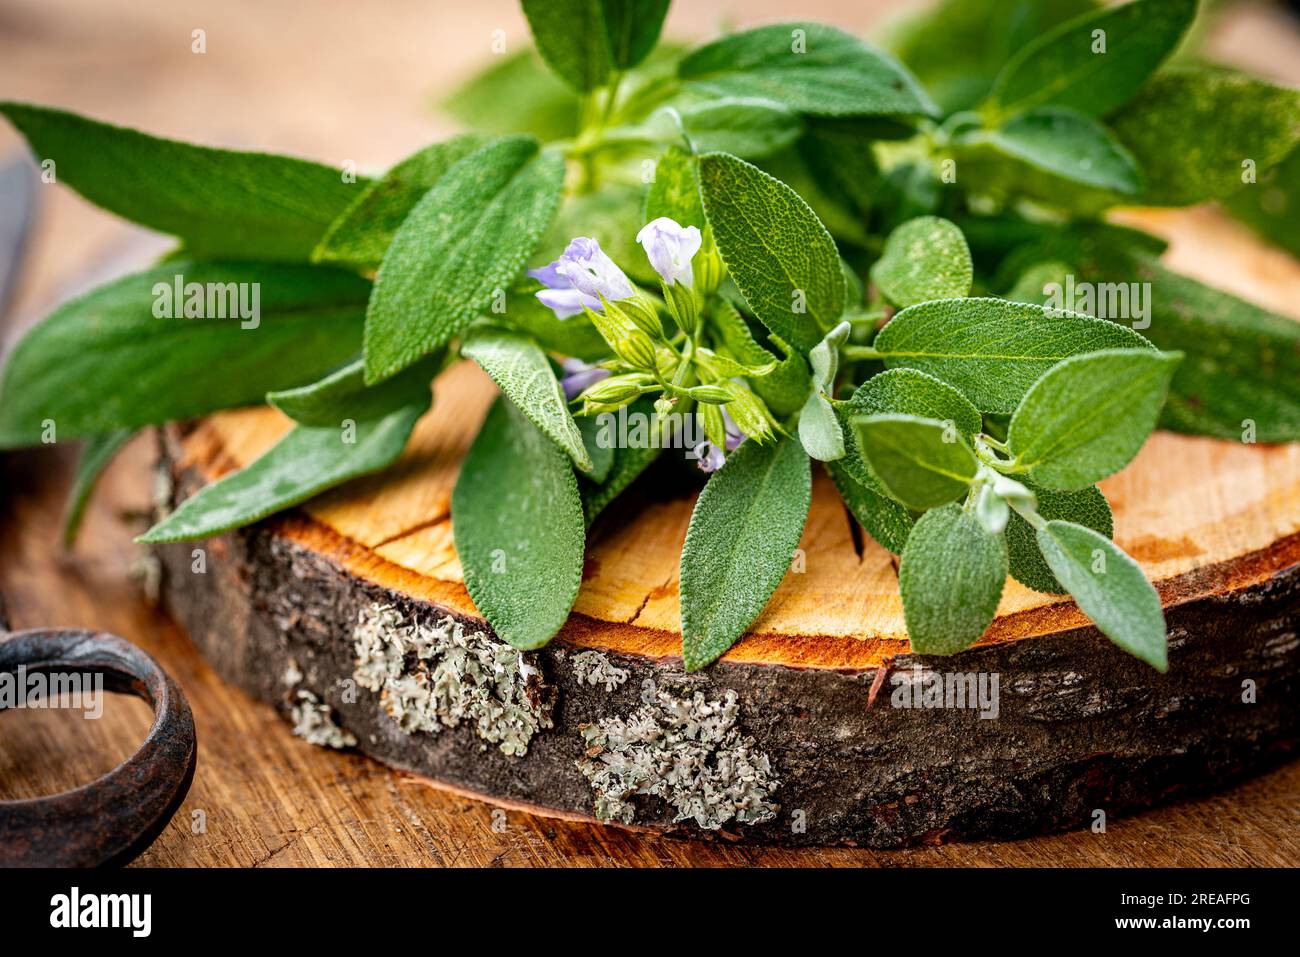 Salvia officinalis, common sage, a small evergreen subshrub with flowers used as a culinary herb. Salvia on wooden disc. Stock Photo